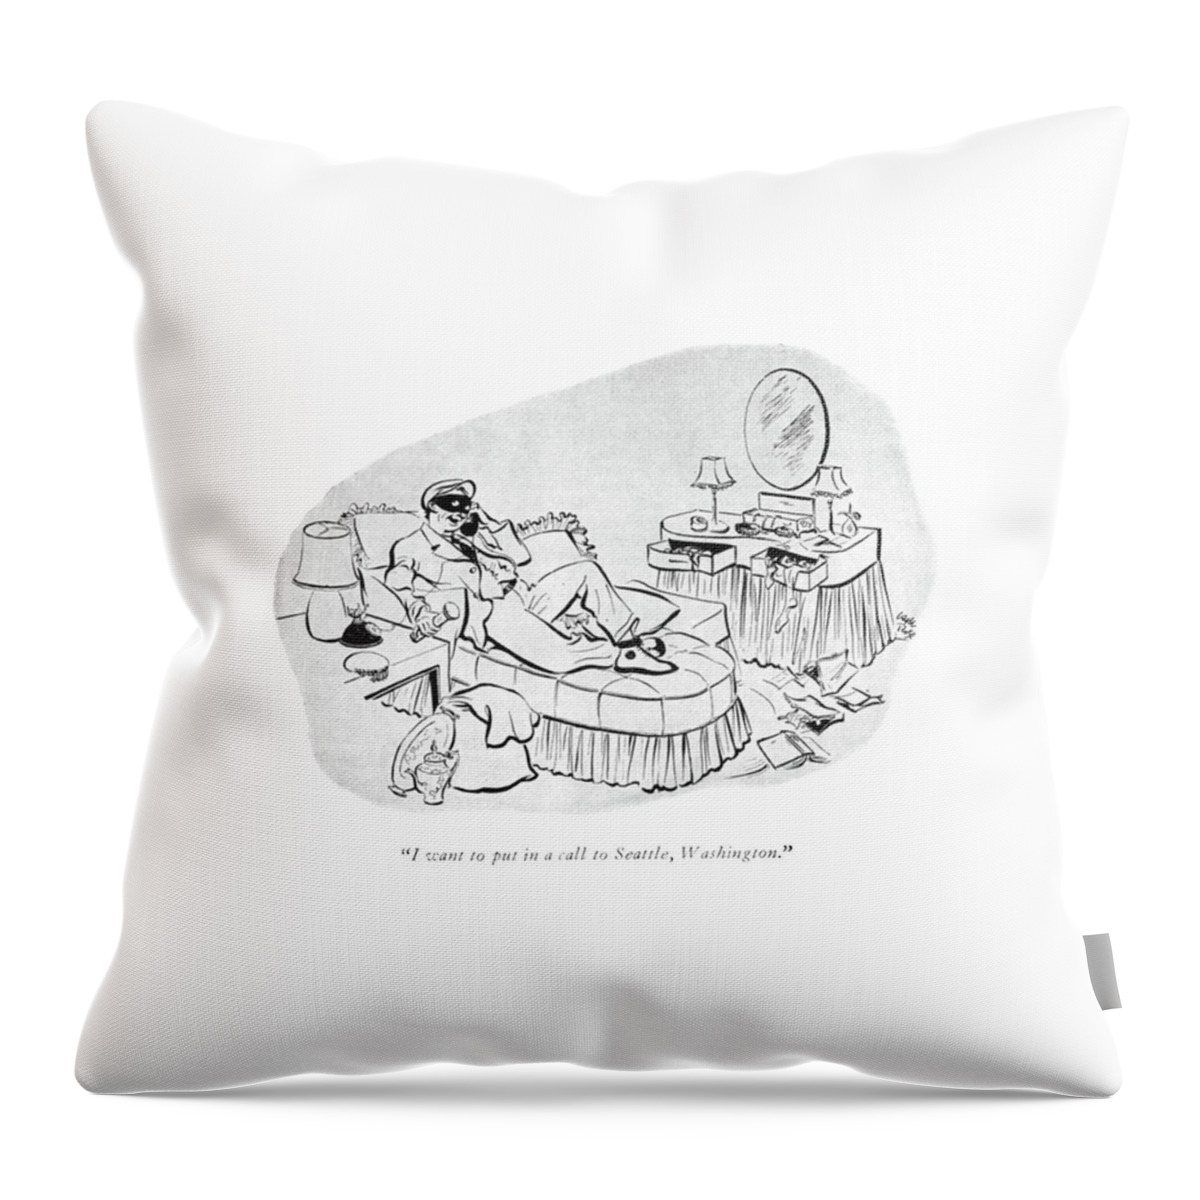 I Want To Put In A Call To Seattle Throw Pillow